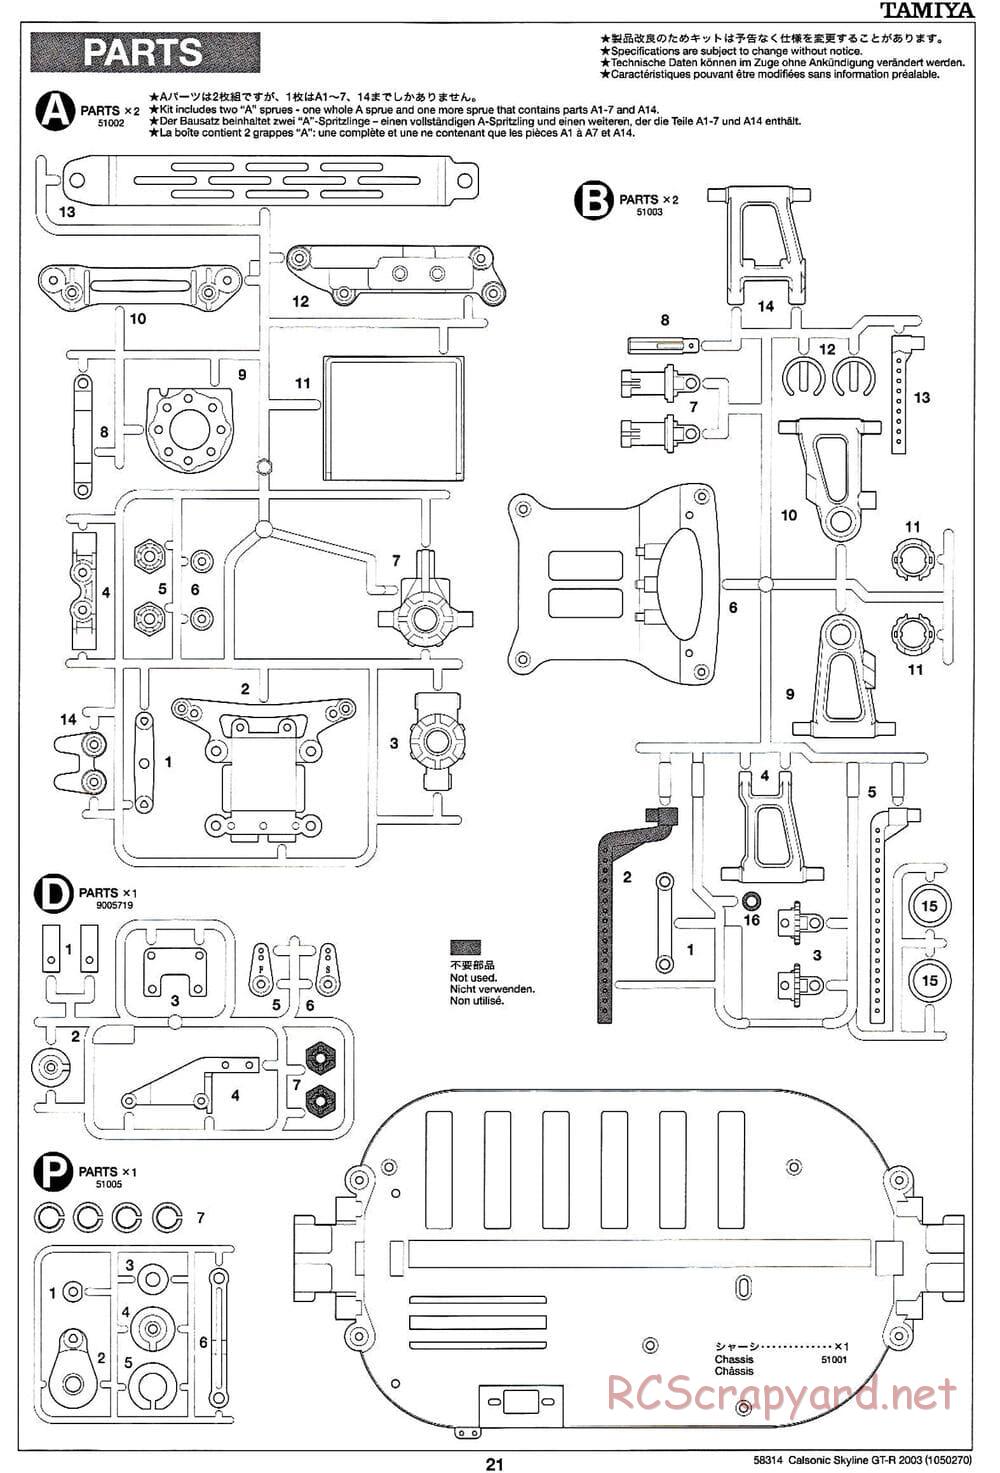 Tamiya - Calsonic Skyline GT-R 2003 - TT-01 Chassis - Manual - Page 21